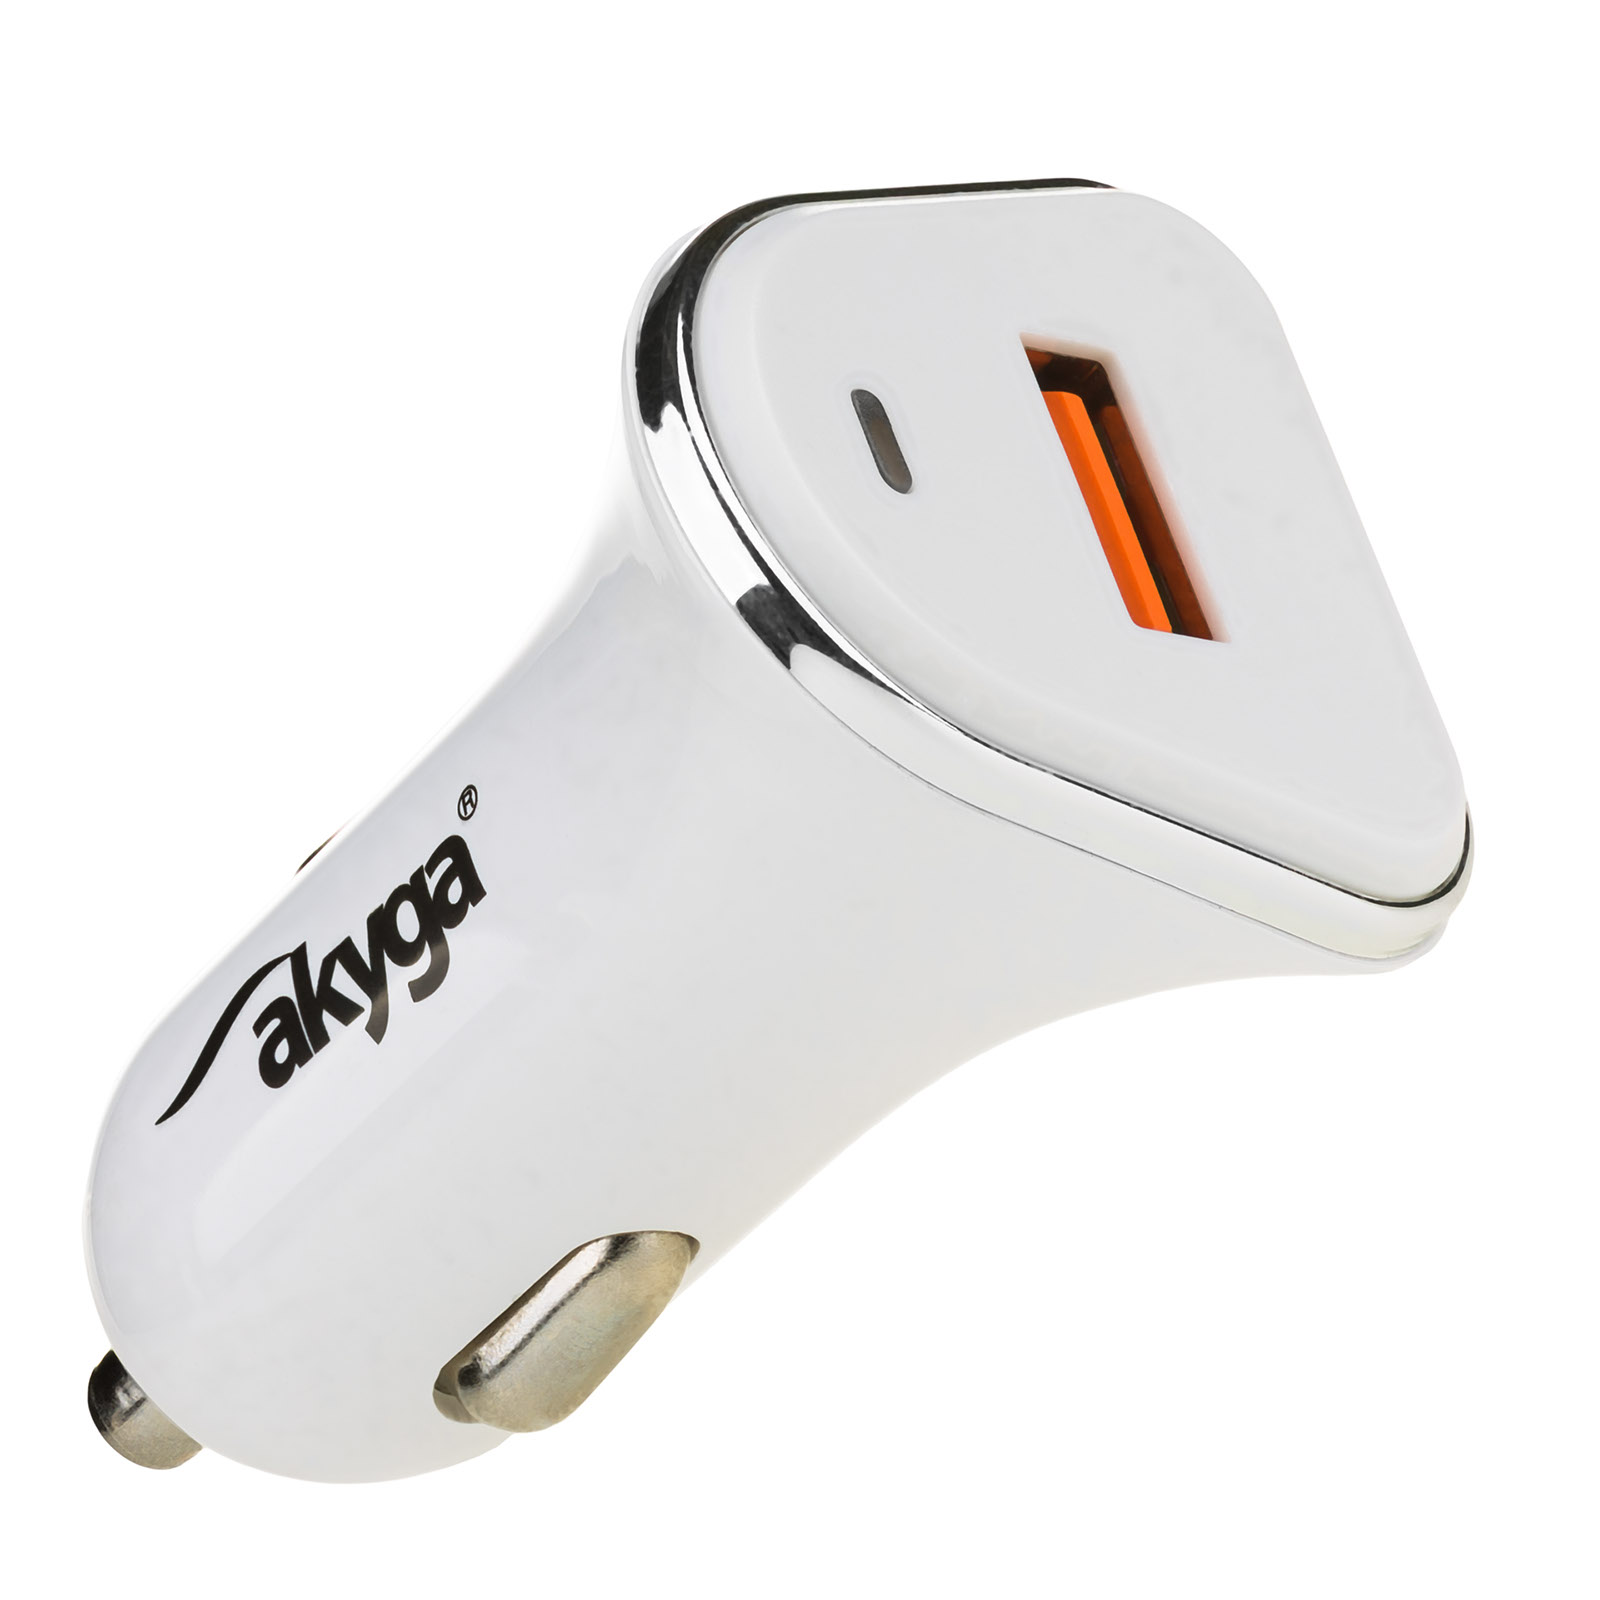 Main image USB Car Charger AK-CH-07 USB-A 5-12V / max. 3A 18W Quick Charge 3.0